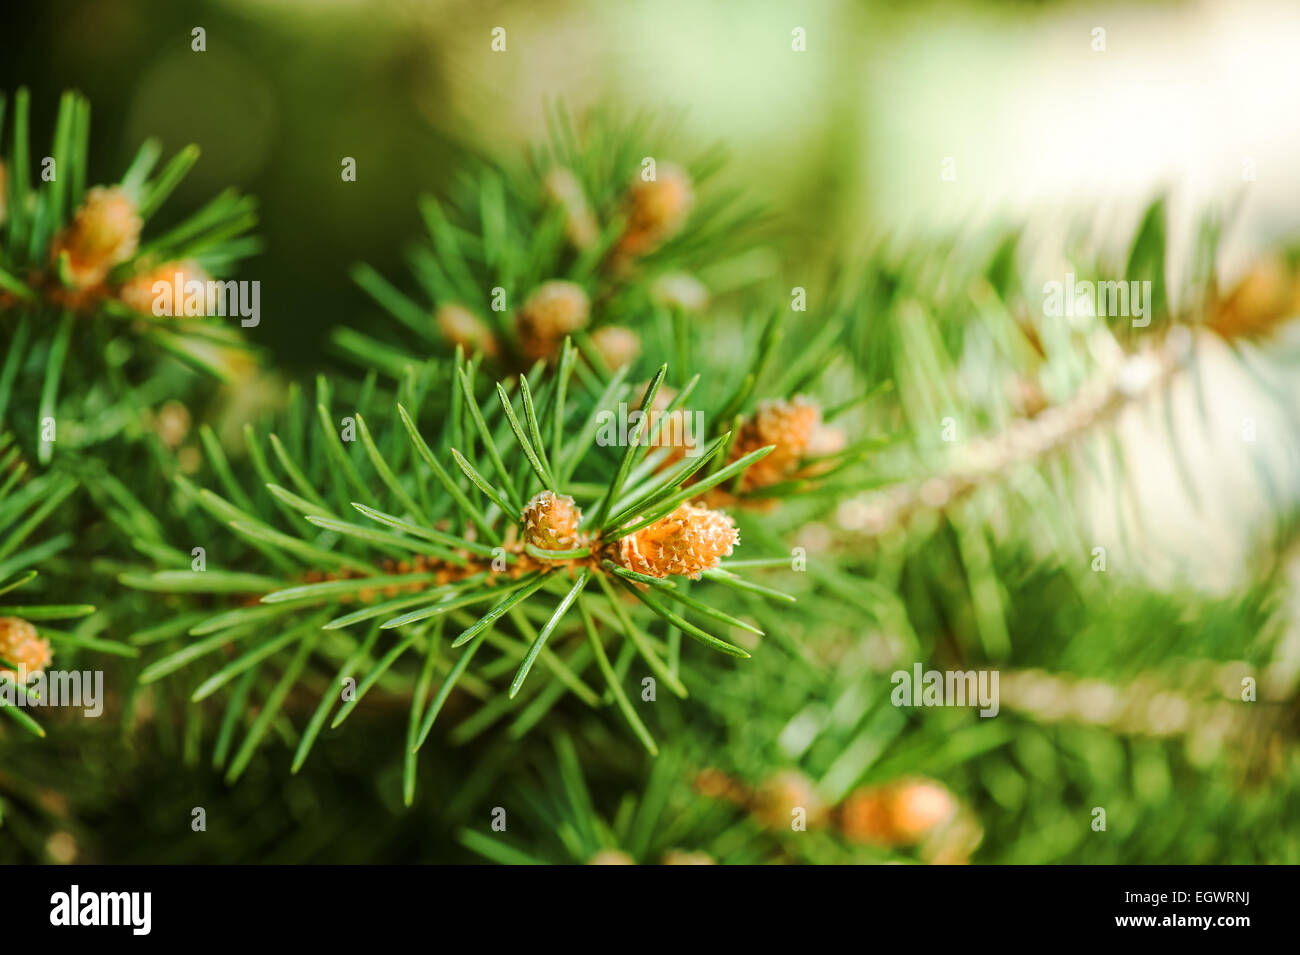 Young shoots of pine trees in the forest spring Stock Photo